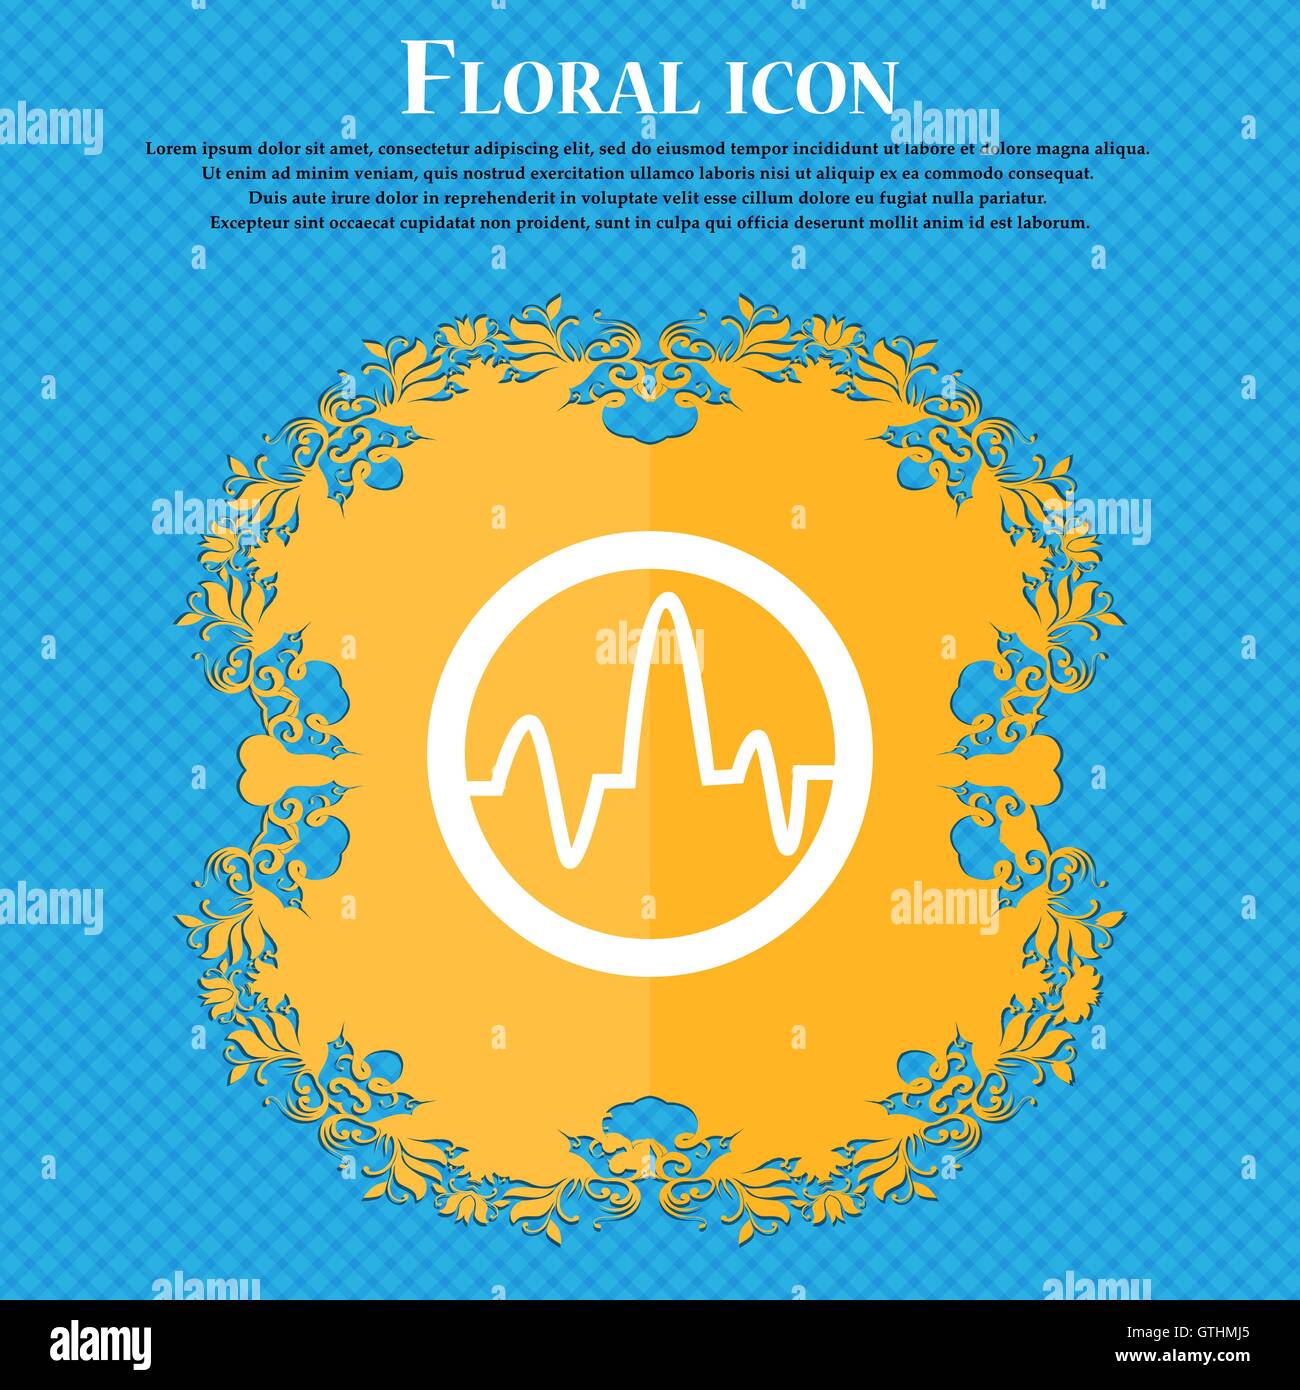 pulse Icon icon. Floral flat design on a blue abstract background with place for your text. Vector Stock Vector